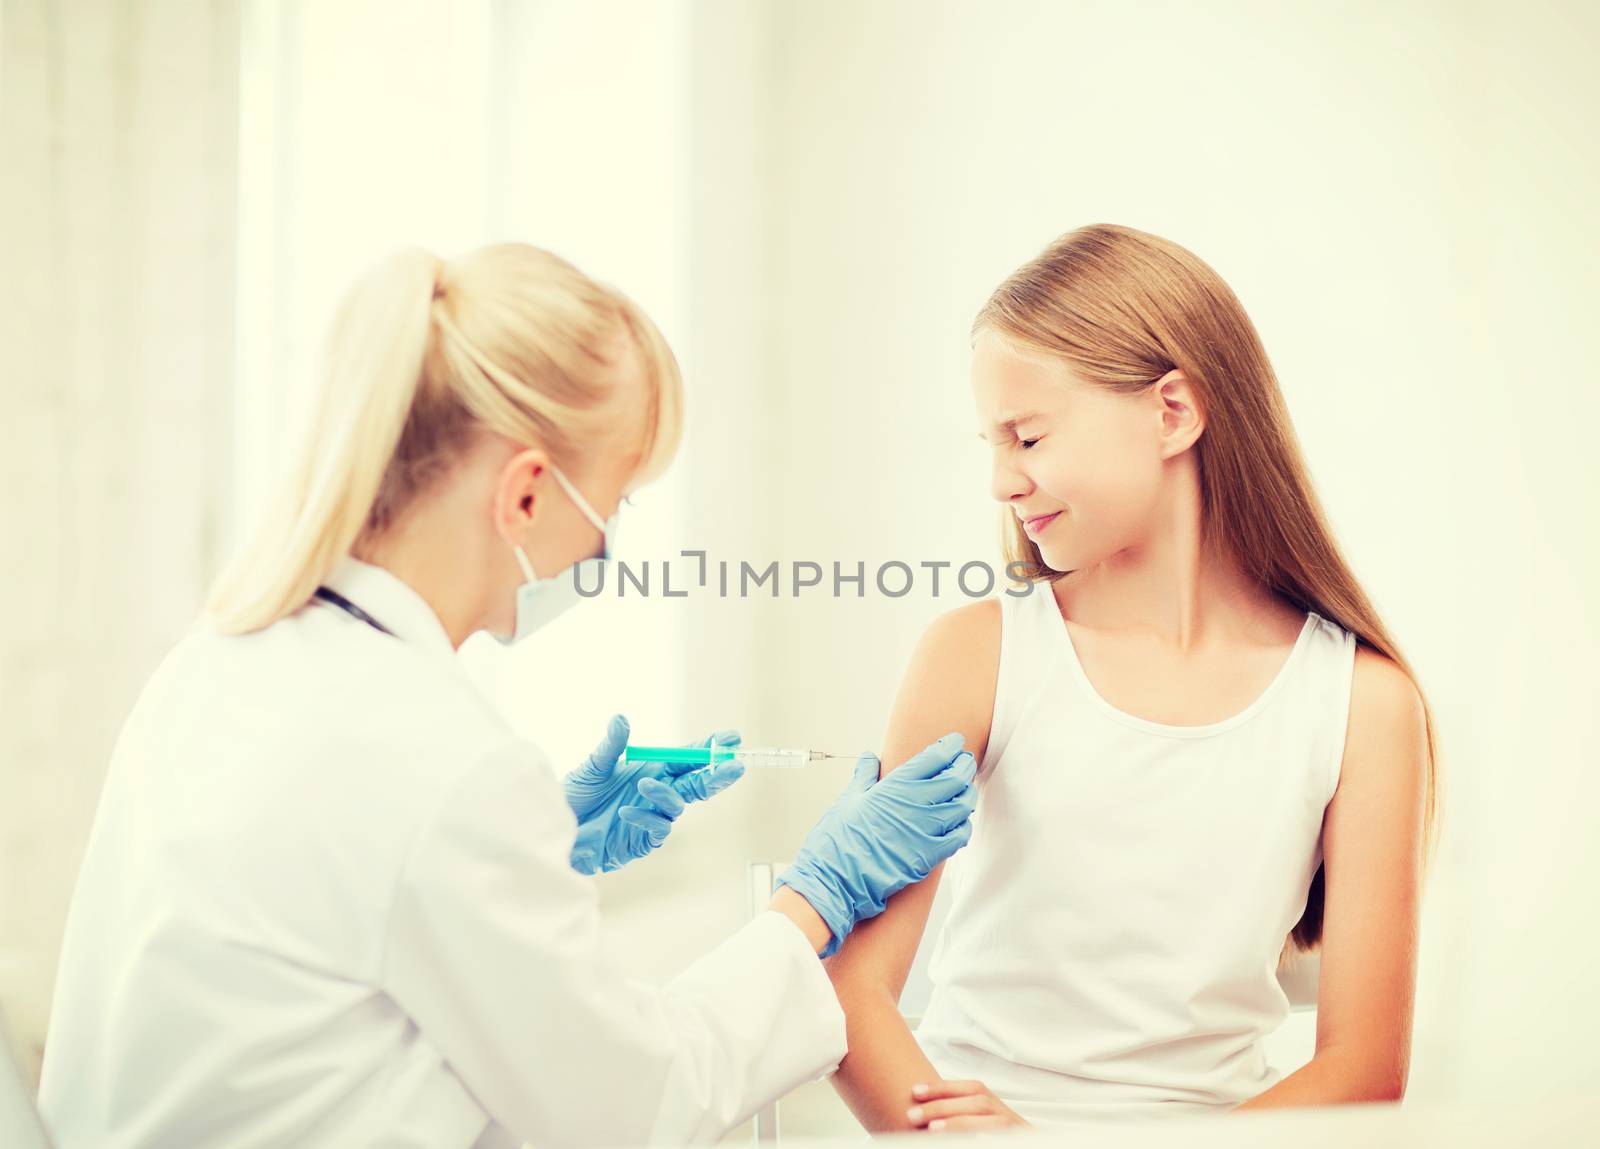 healthcare and medical concept - doctor doing vaccine to child in hospital